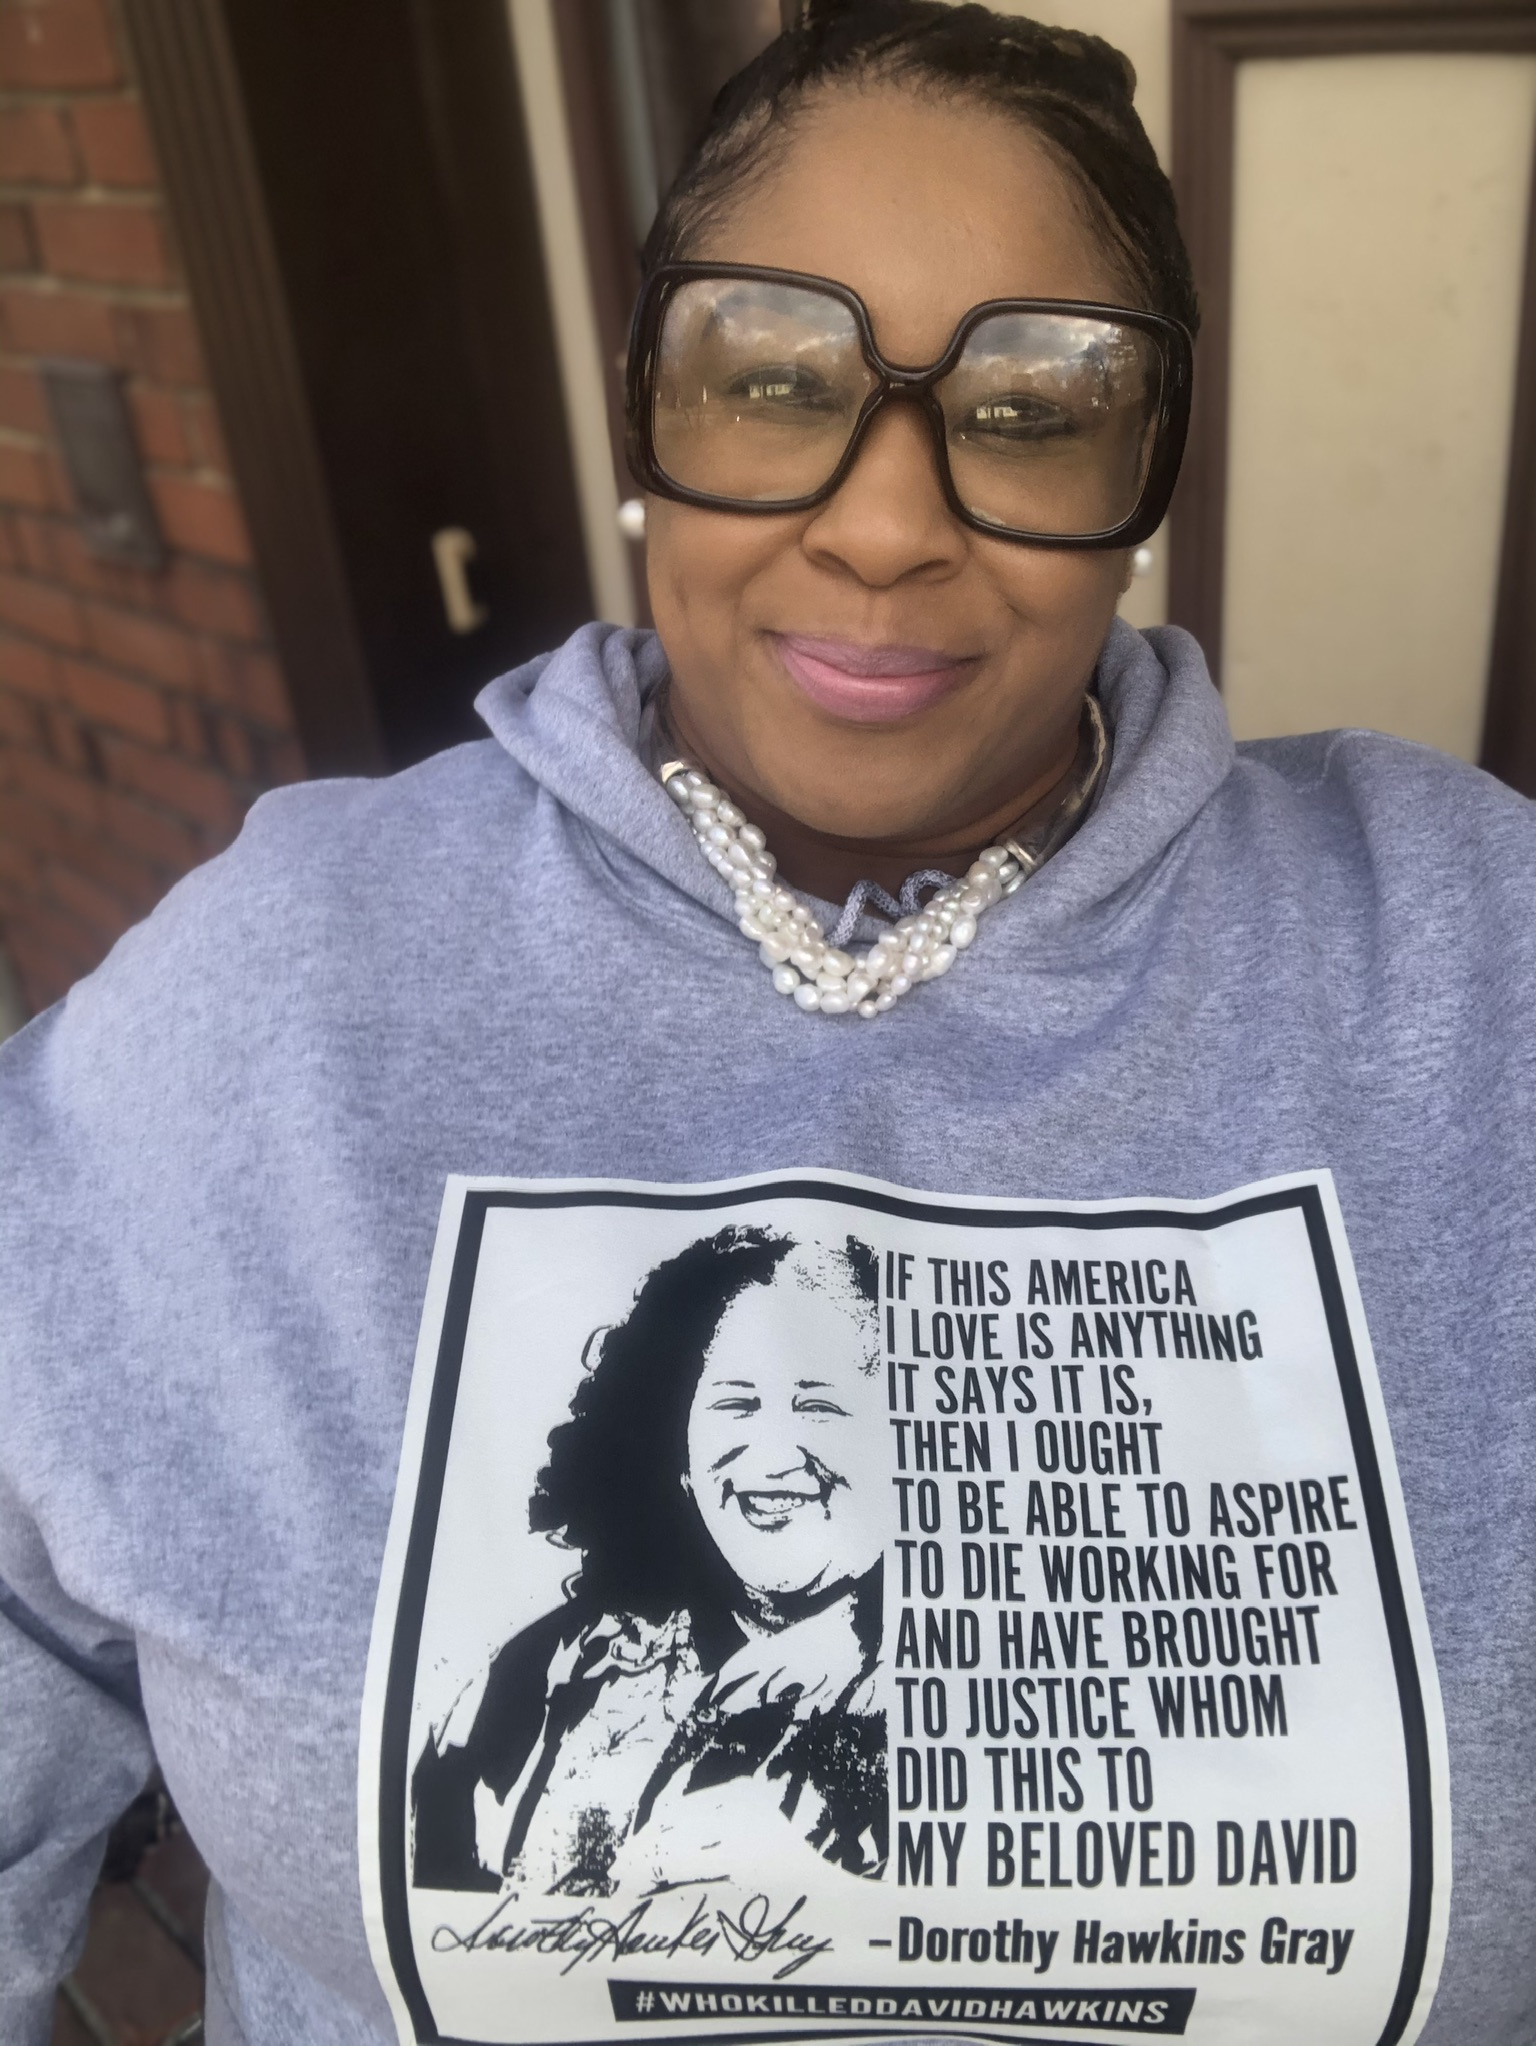 Cynthia Edwards wears her mother's declaration as a badge of honor